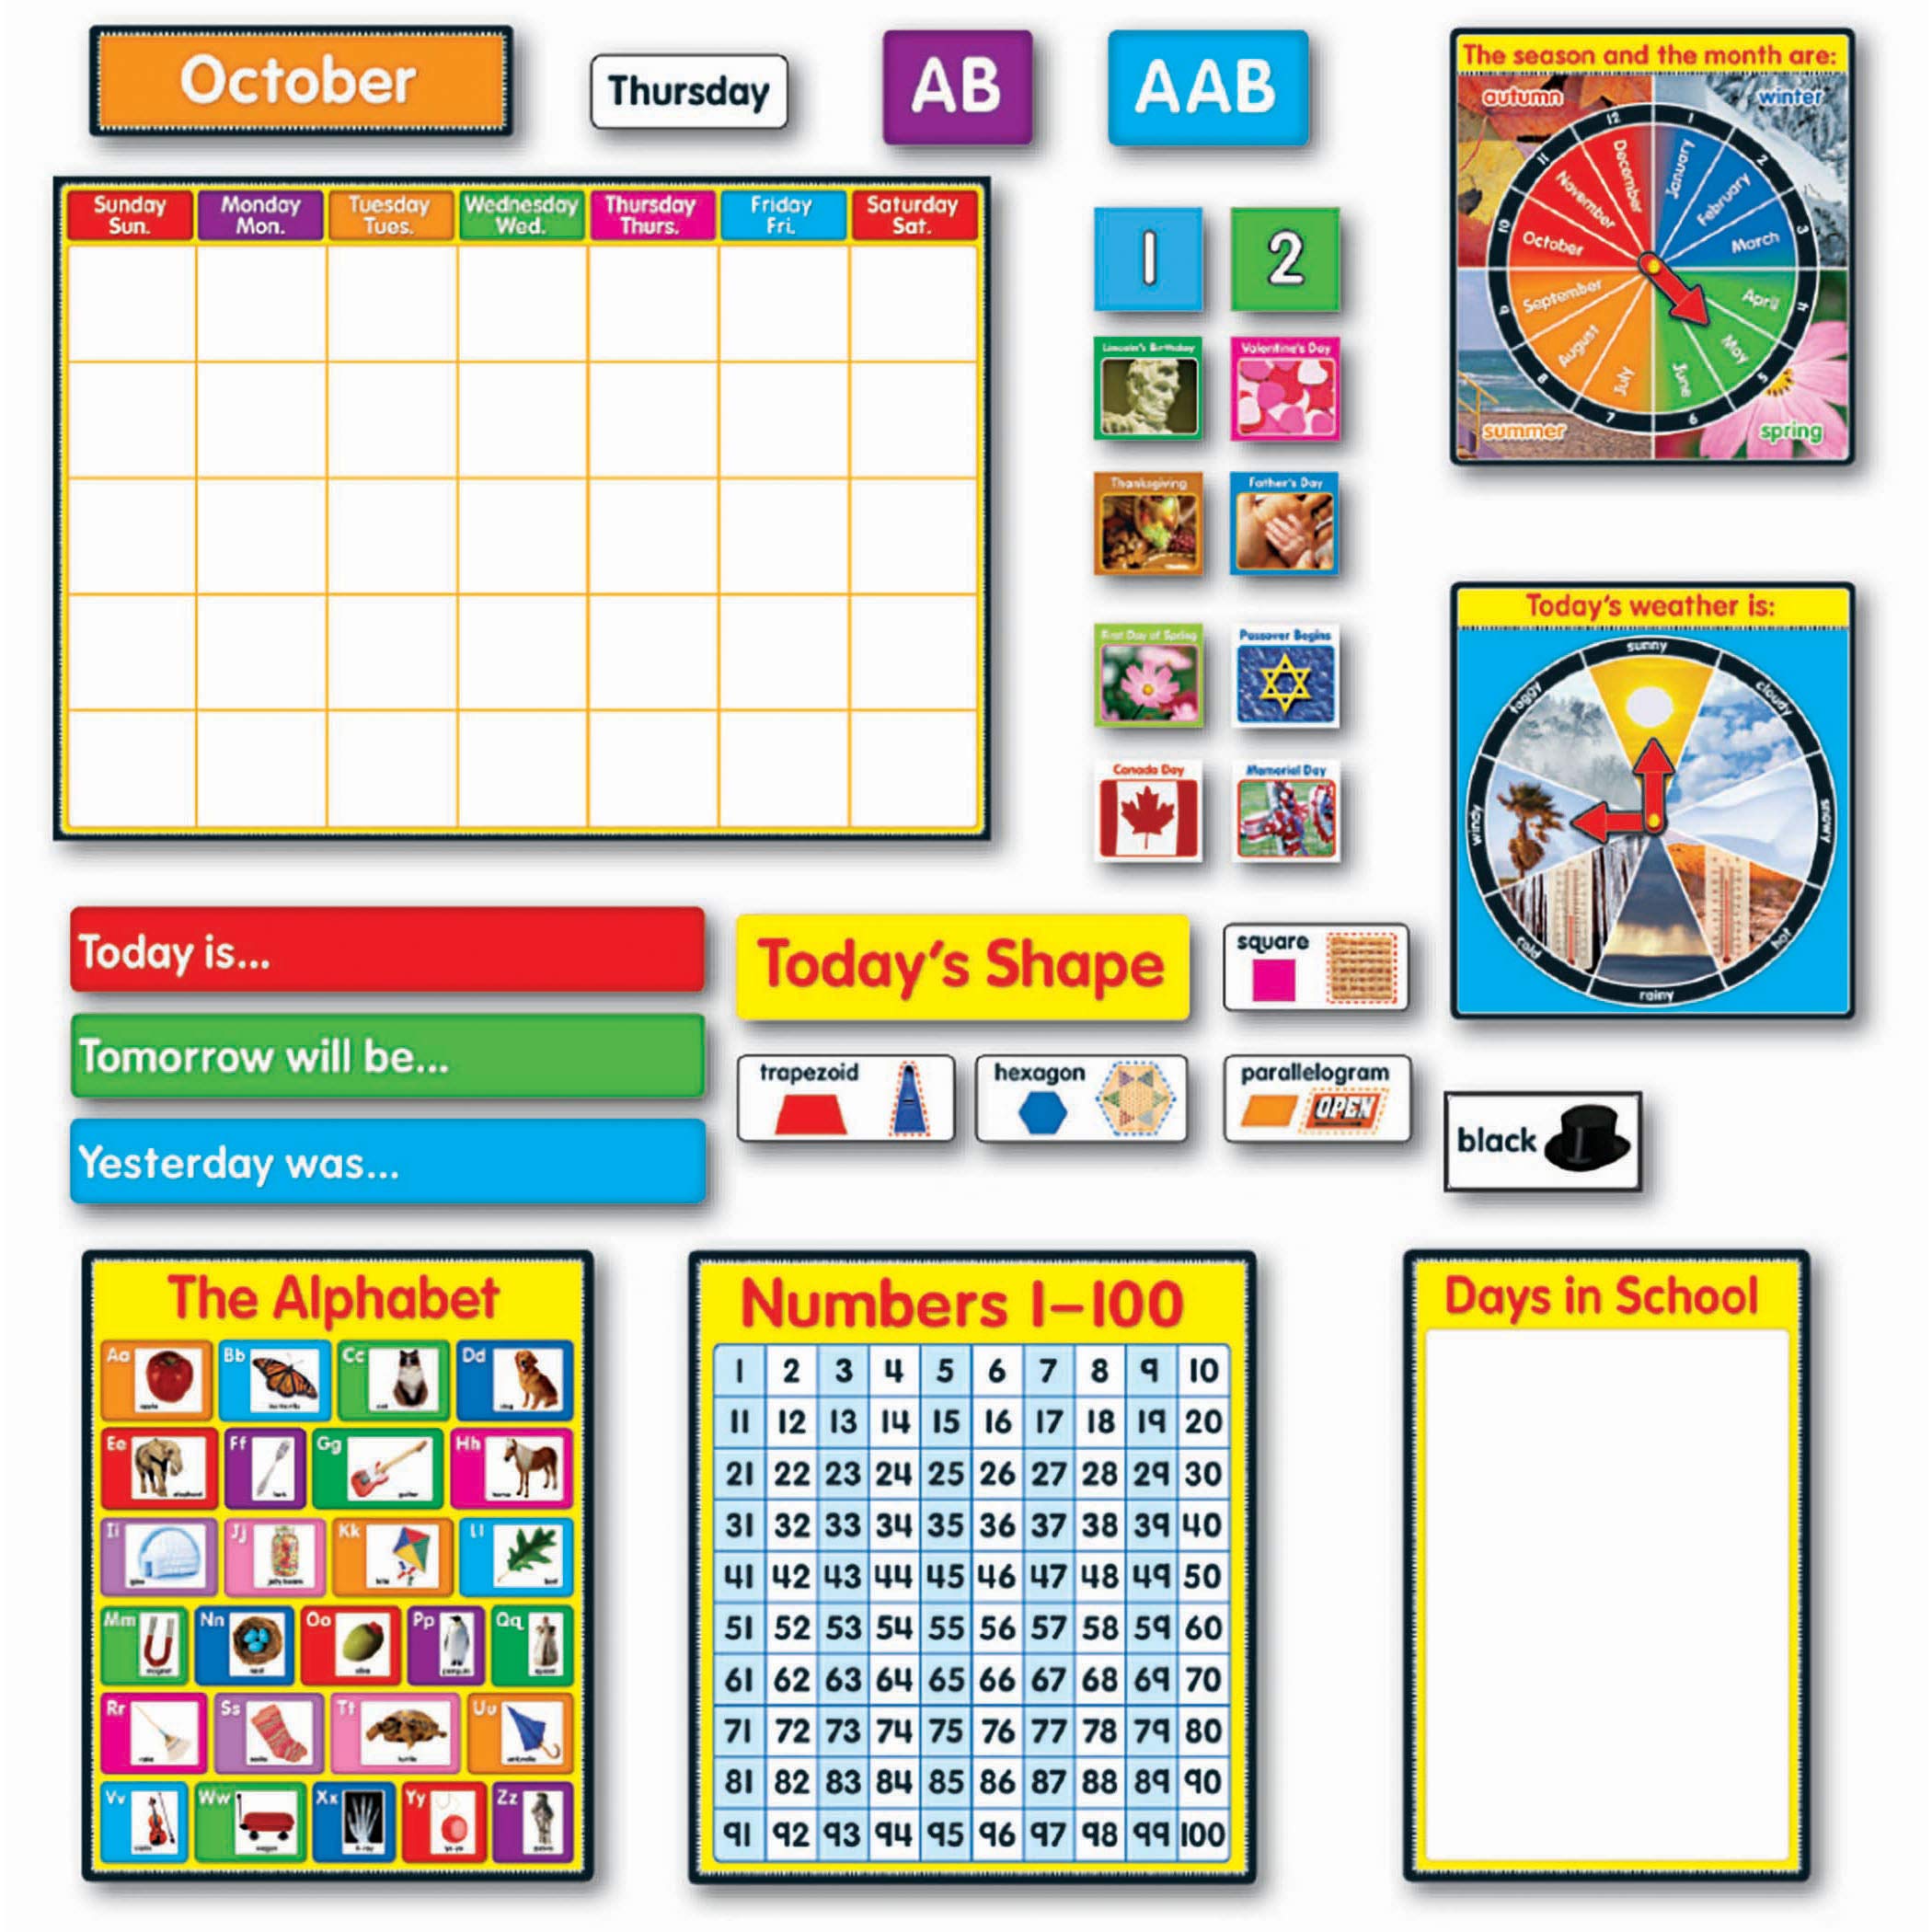 Book Cover Carson Dellosa Circle Time Learning Center Calendar Bulletin Board Set, Monthly Calendar with Numbers, Holidays, Alphabet, Weather, Seasons, Colors, Shapes, Hundreds Chart, Kindergarten Up (214 pc)